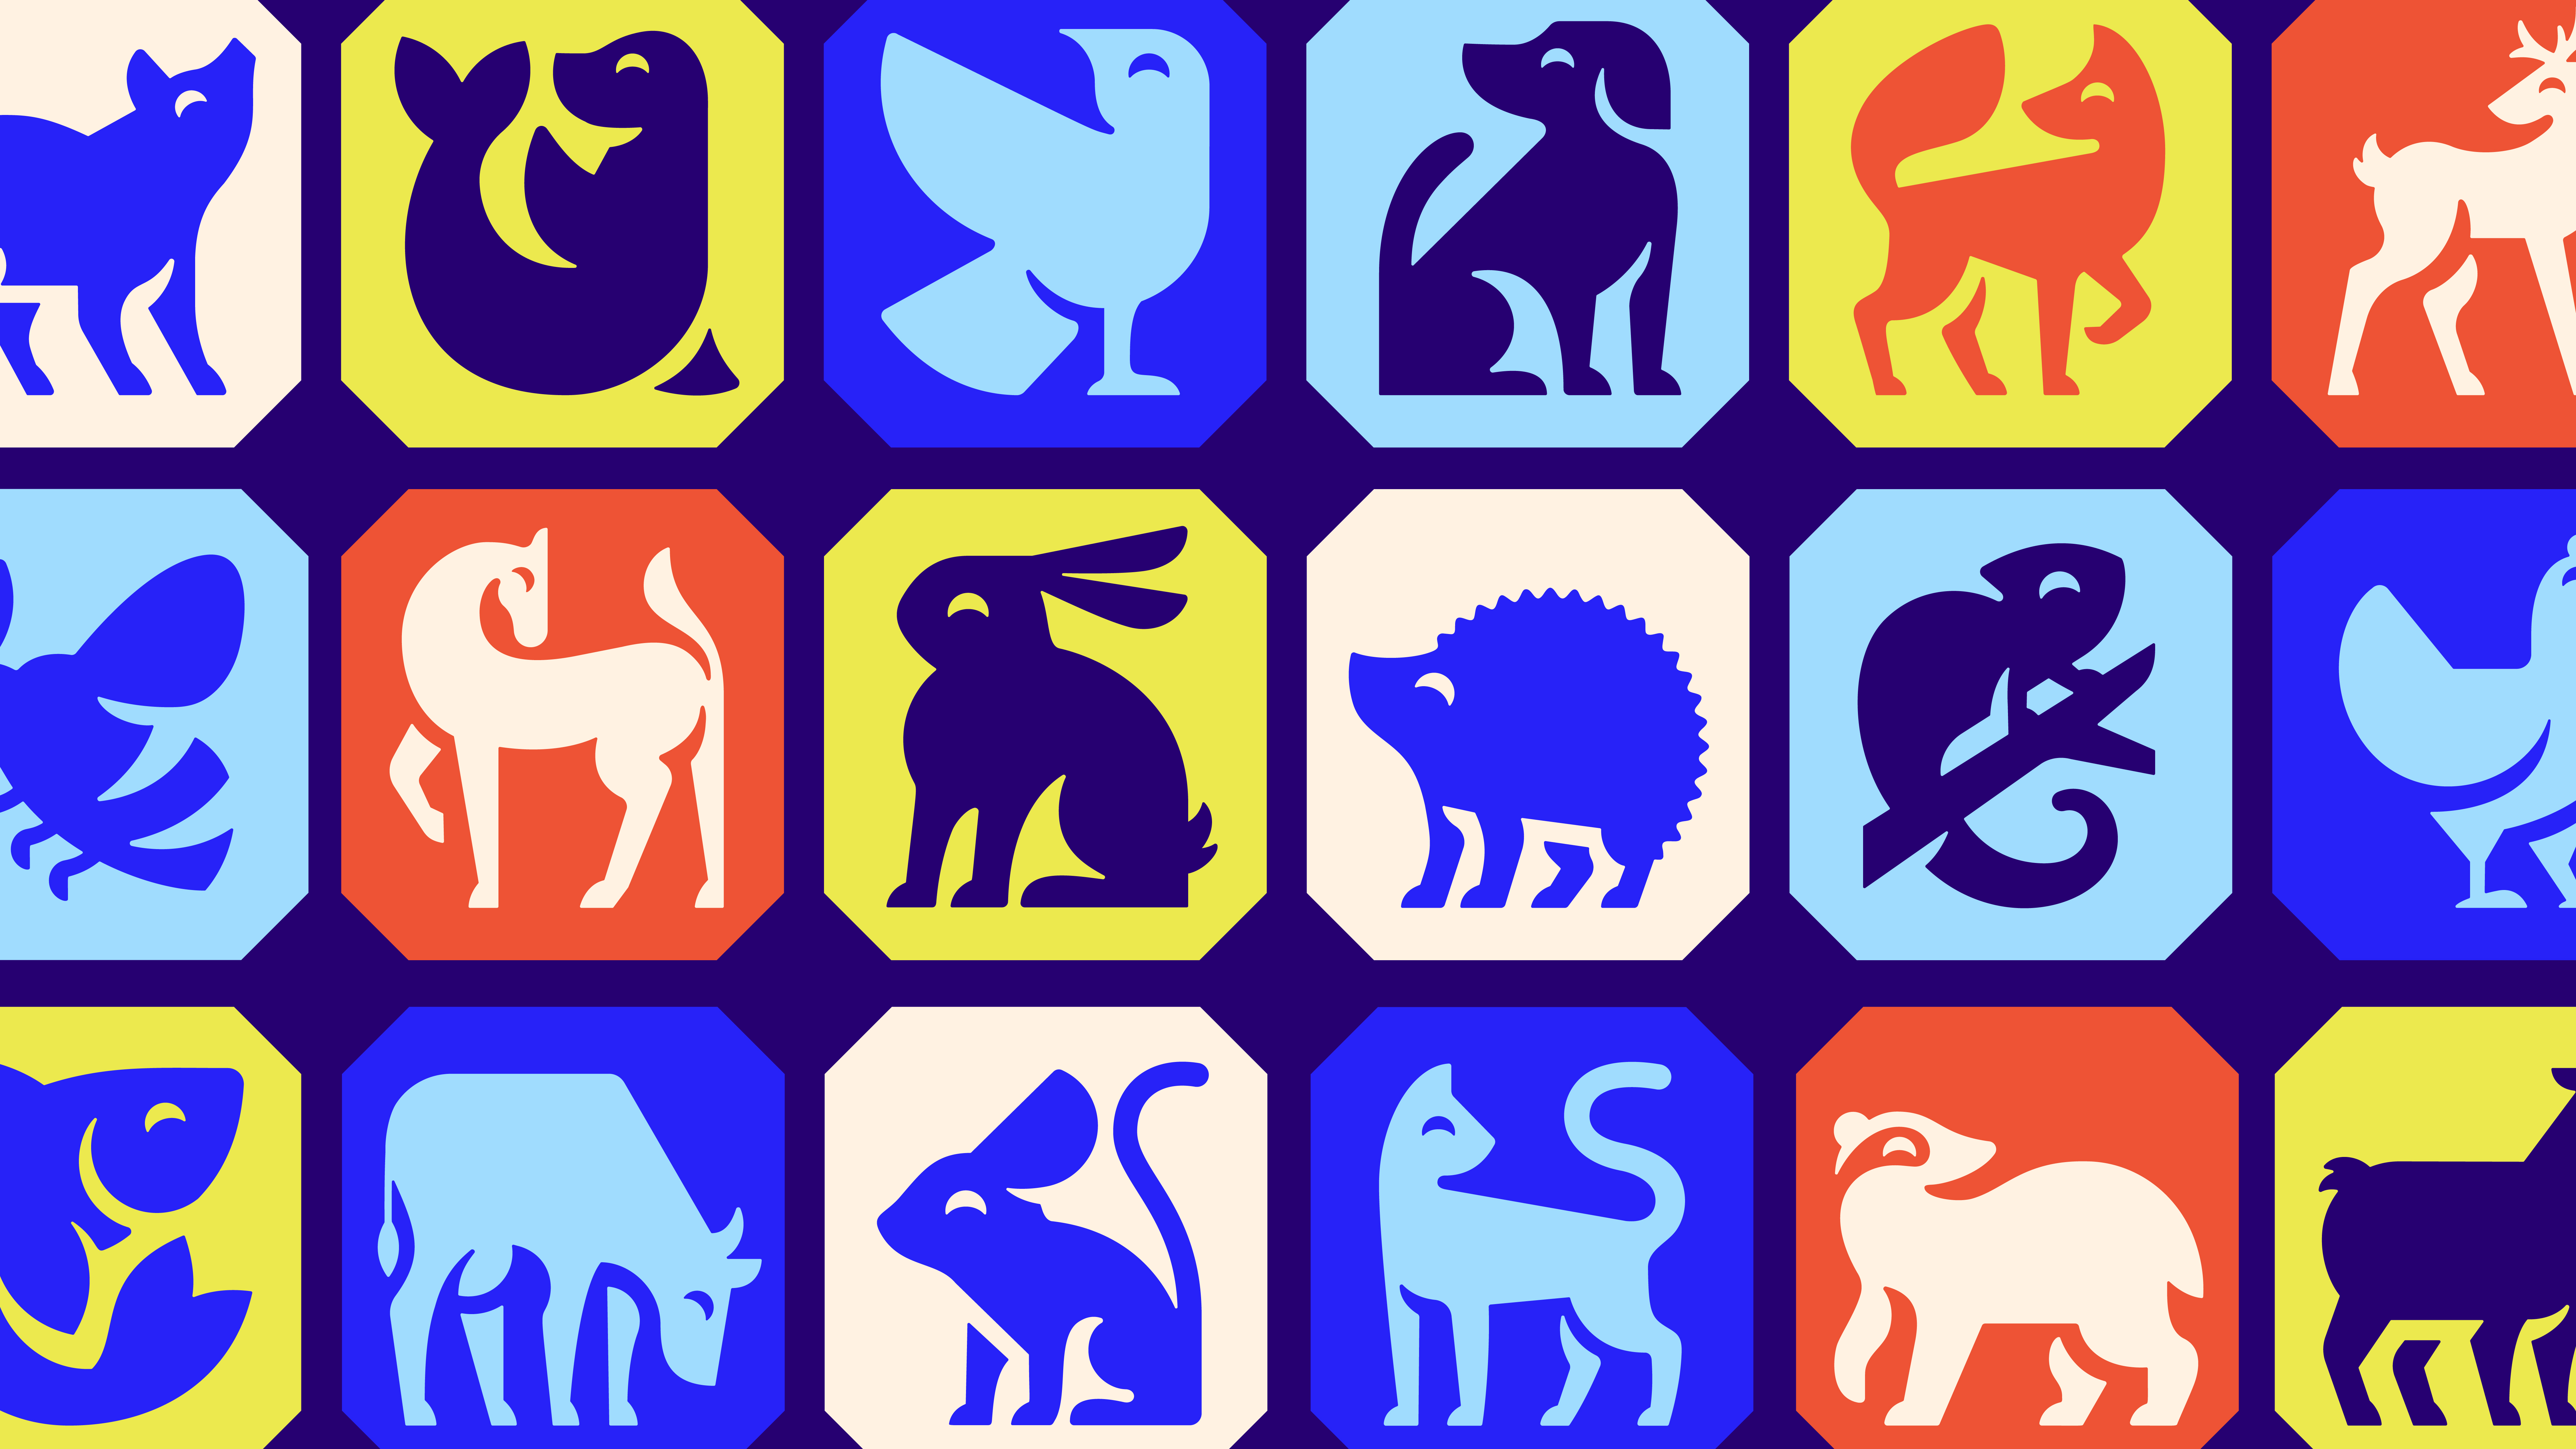 RSPCA logo illustration composite featuring stylised drawings of several animals